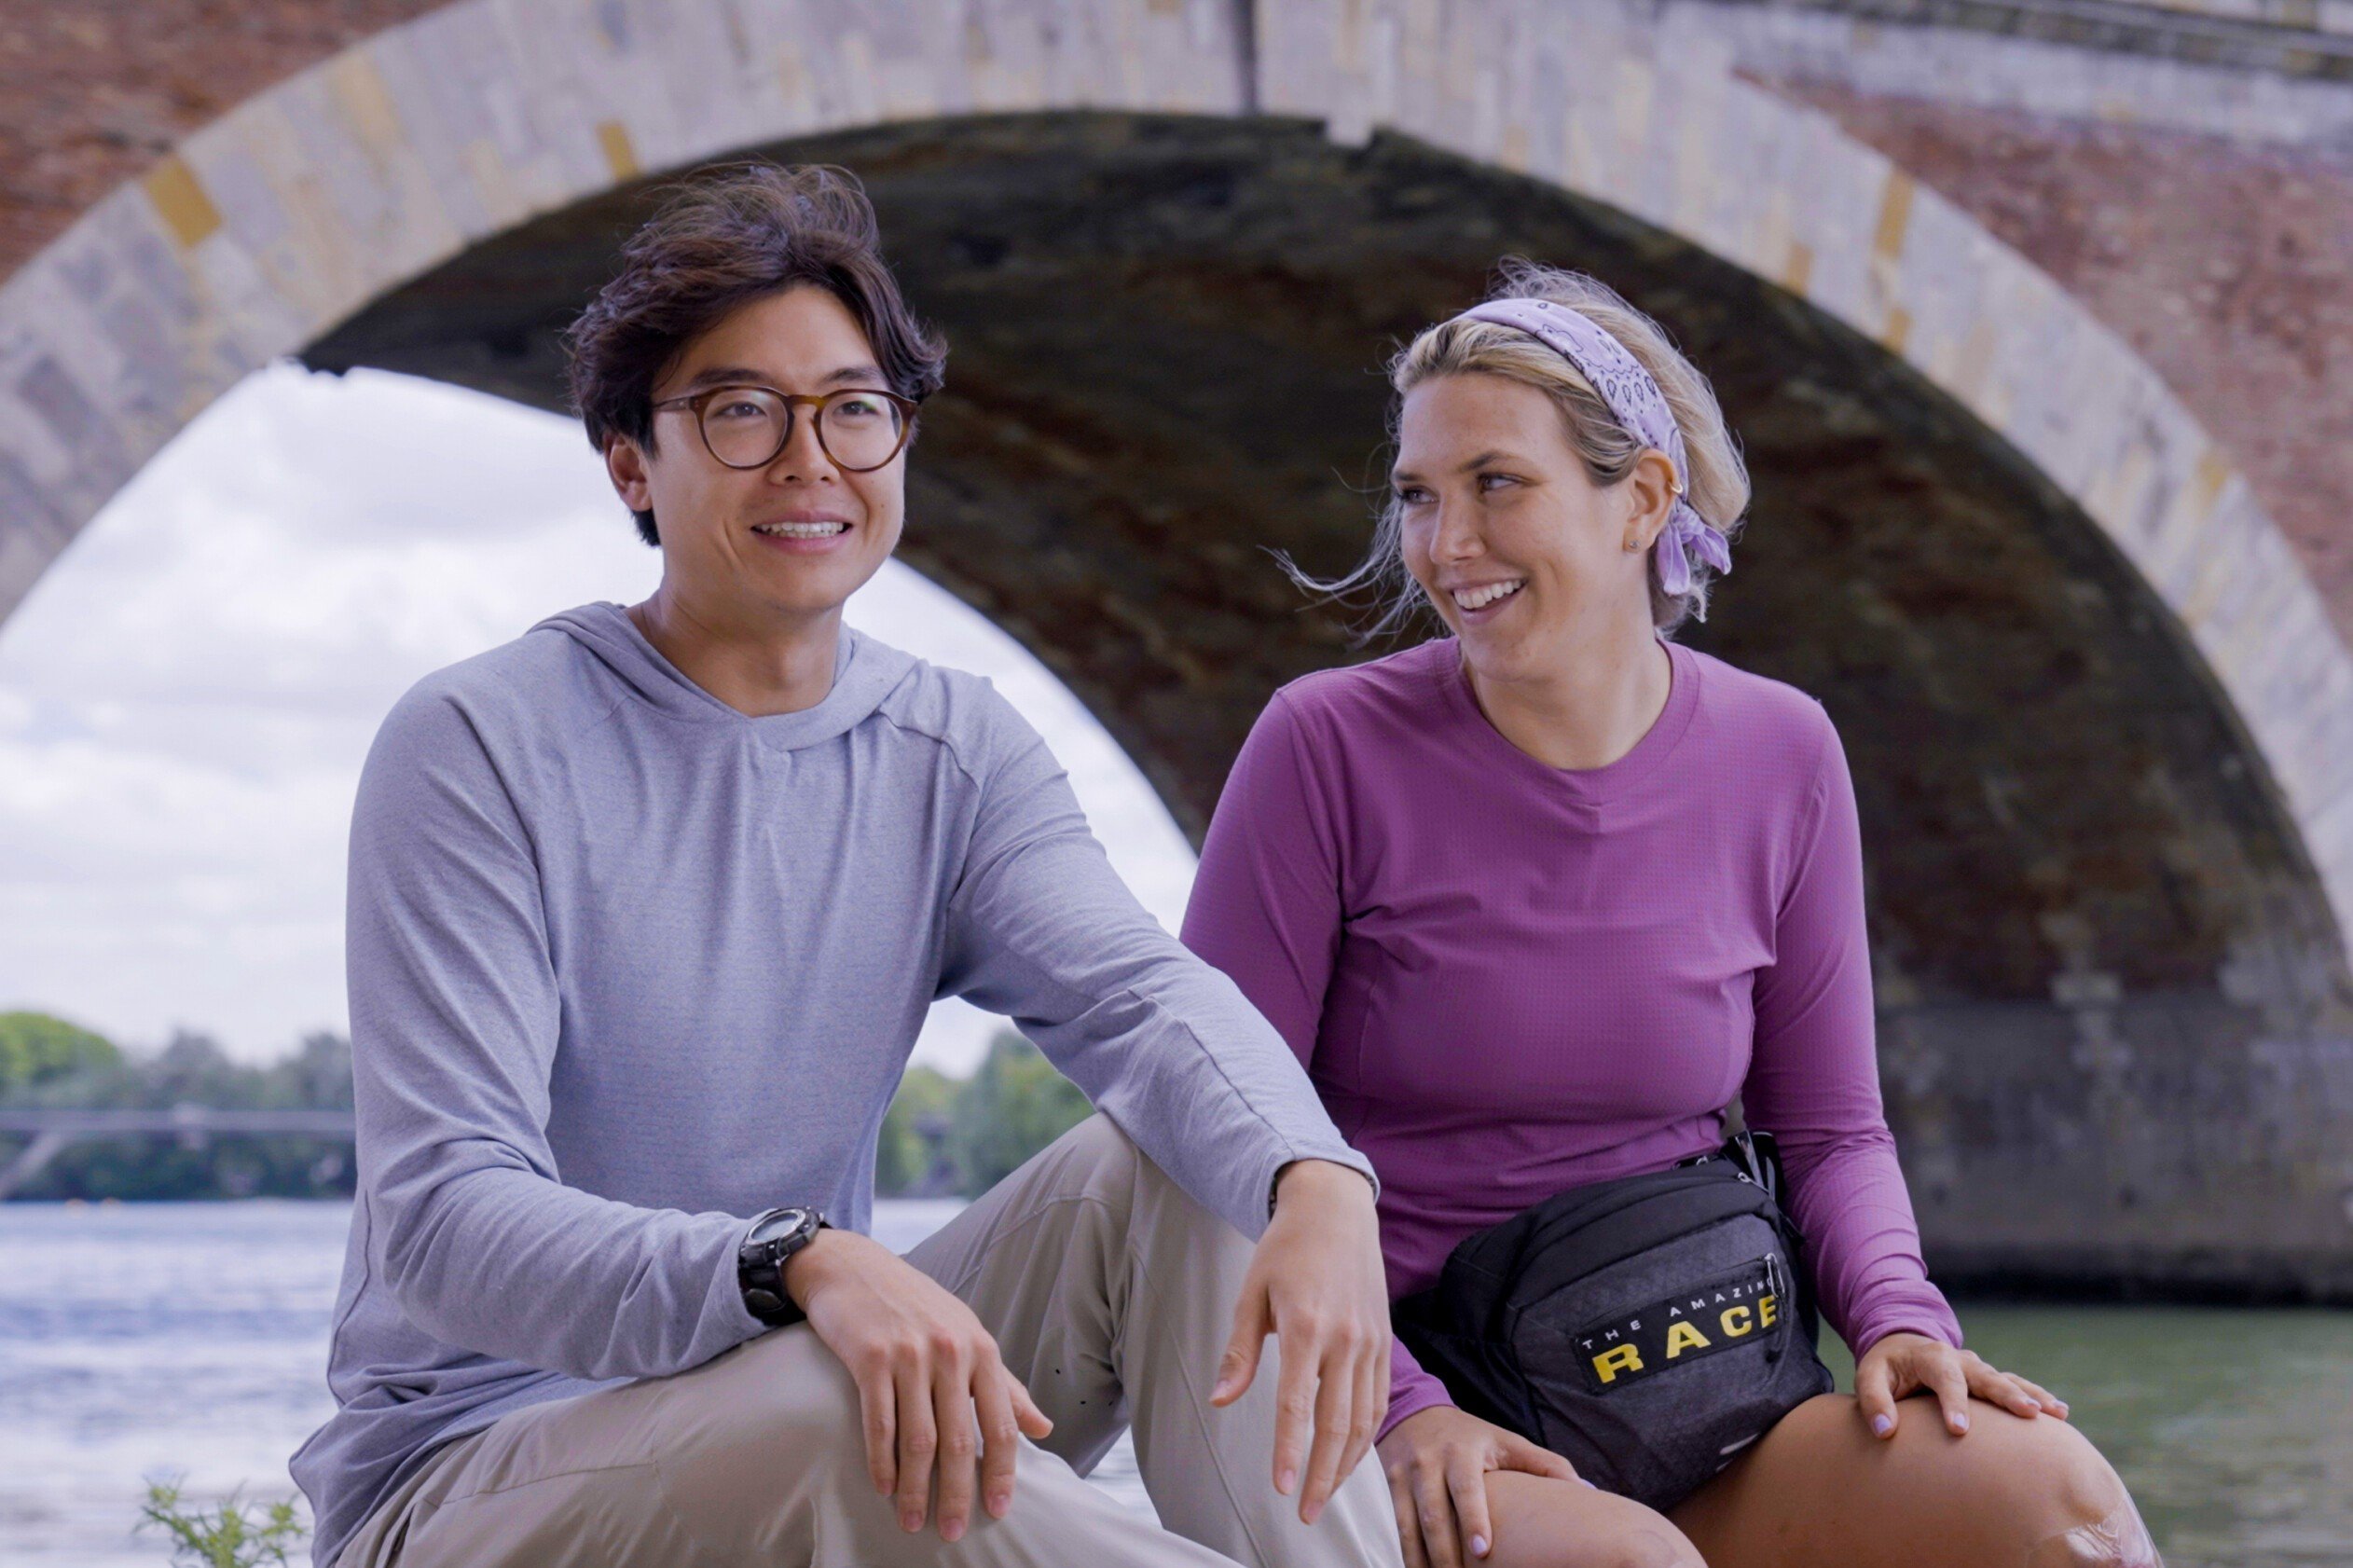 Derek Xiao and Claire Rehfuss, who star in 'The Amazing Race' Season 34 on CBS, film a confessional